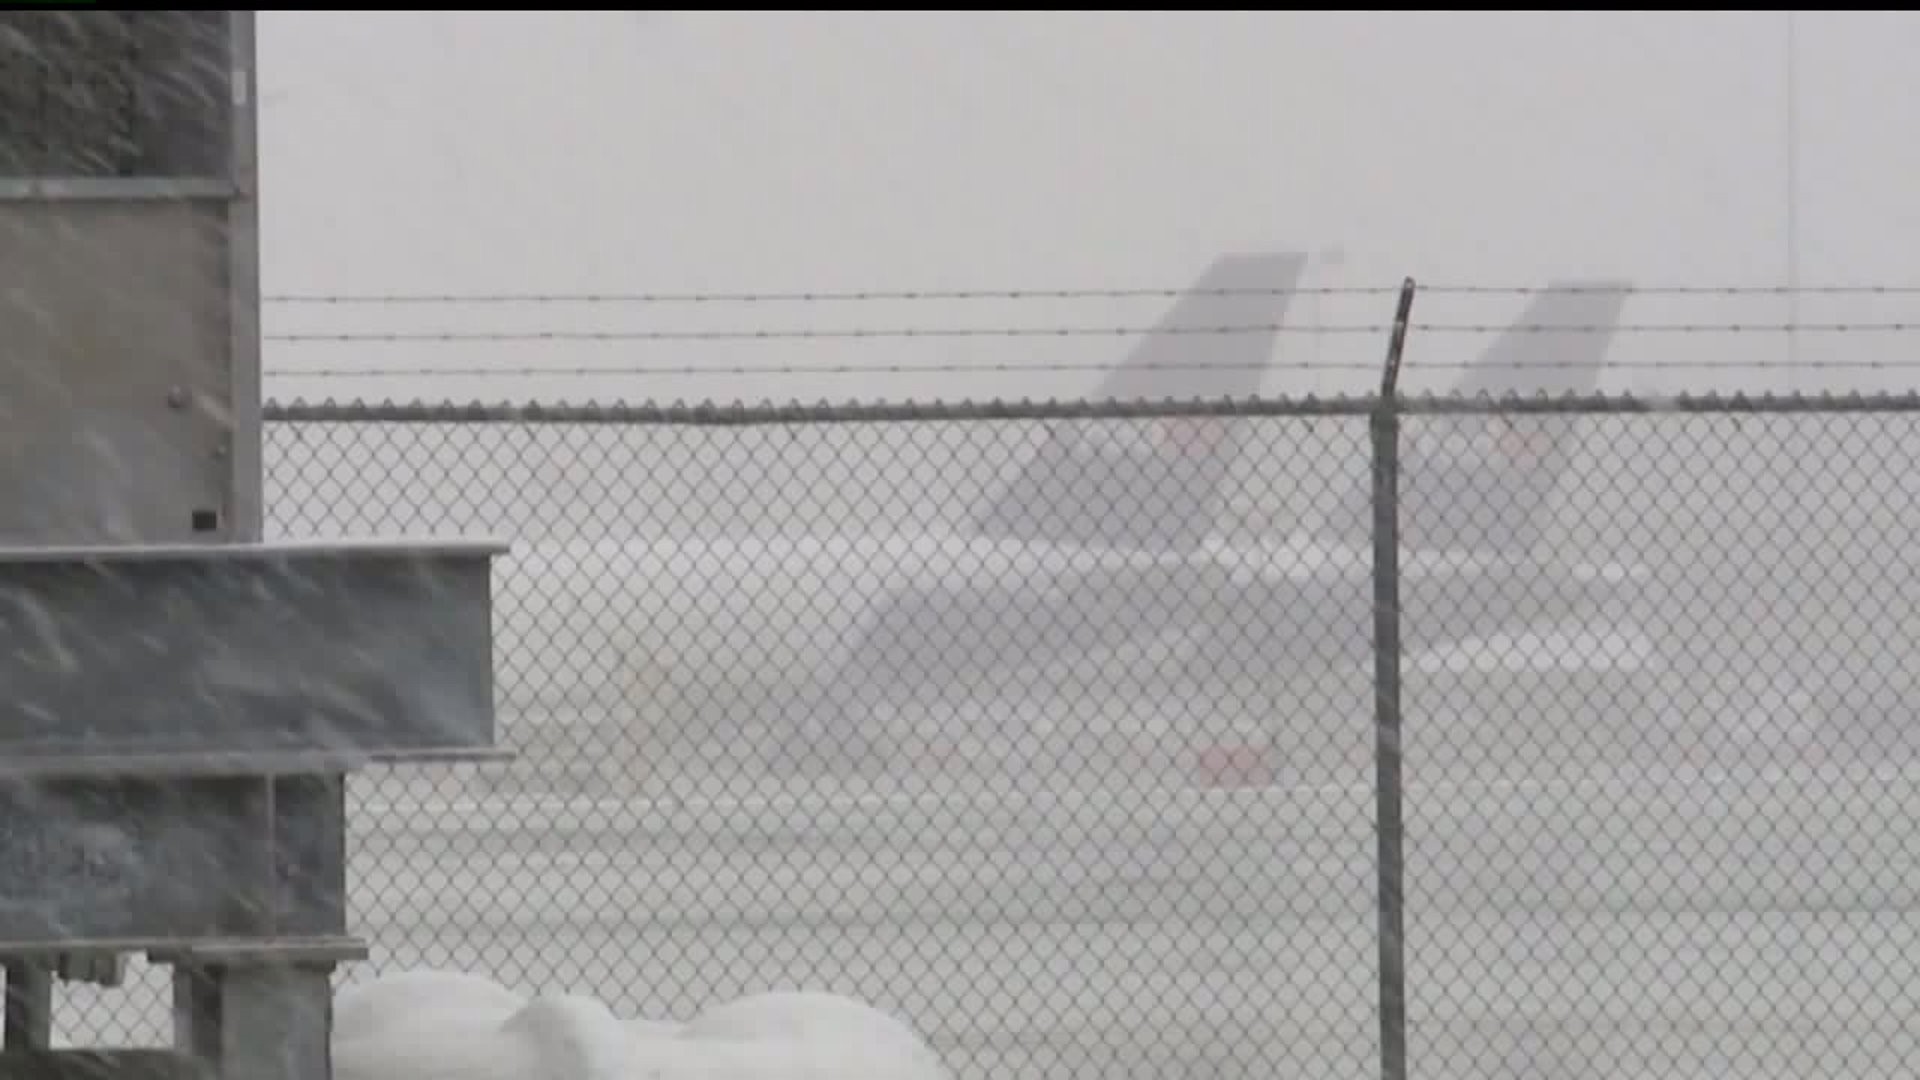 Airline passengers try to escape snowy conditions, others return home to it